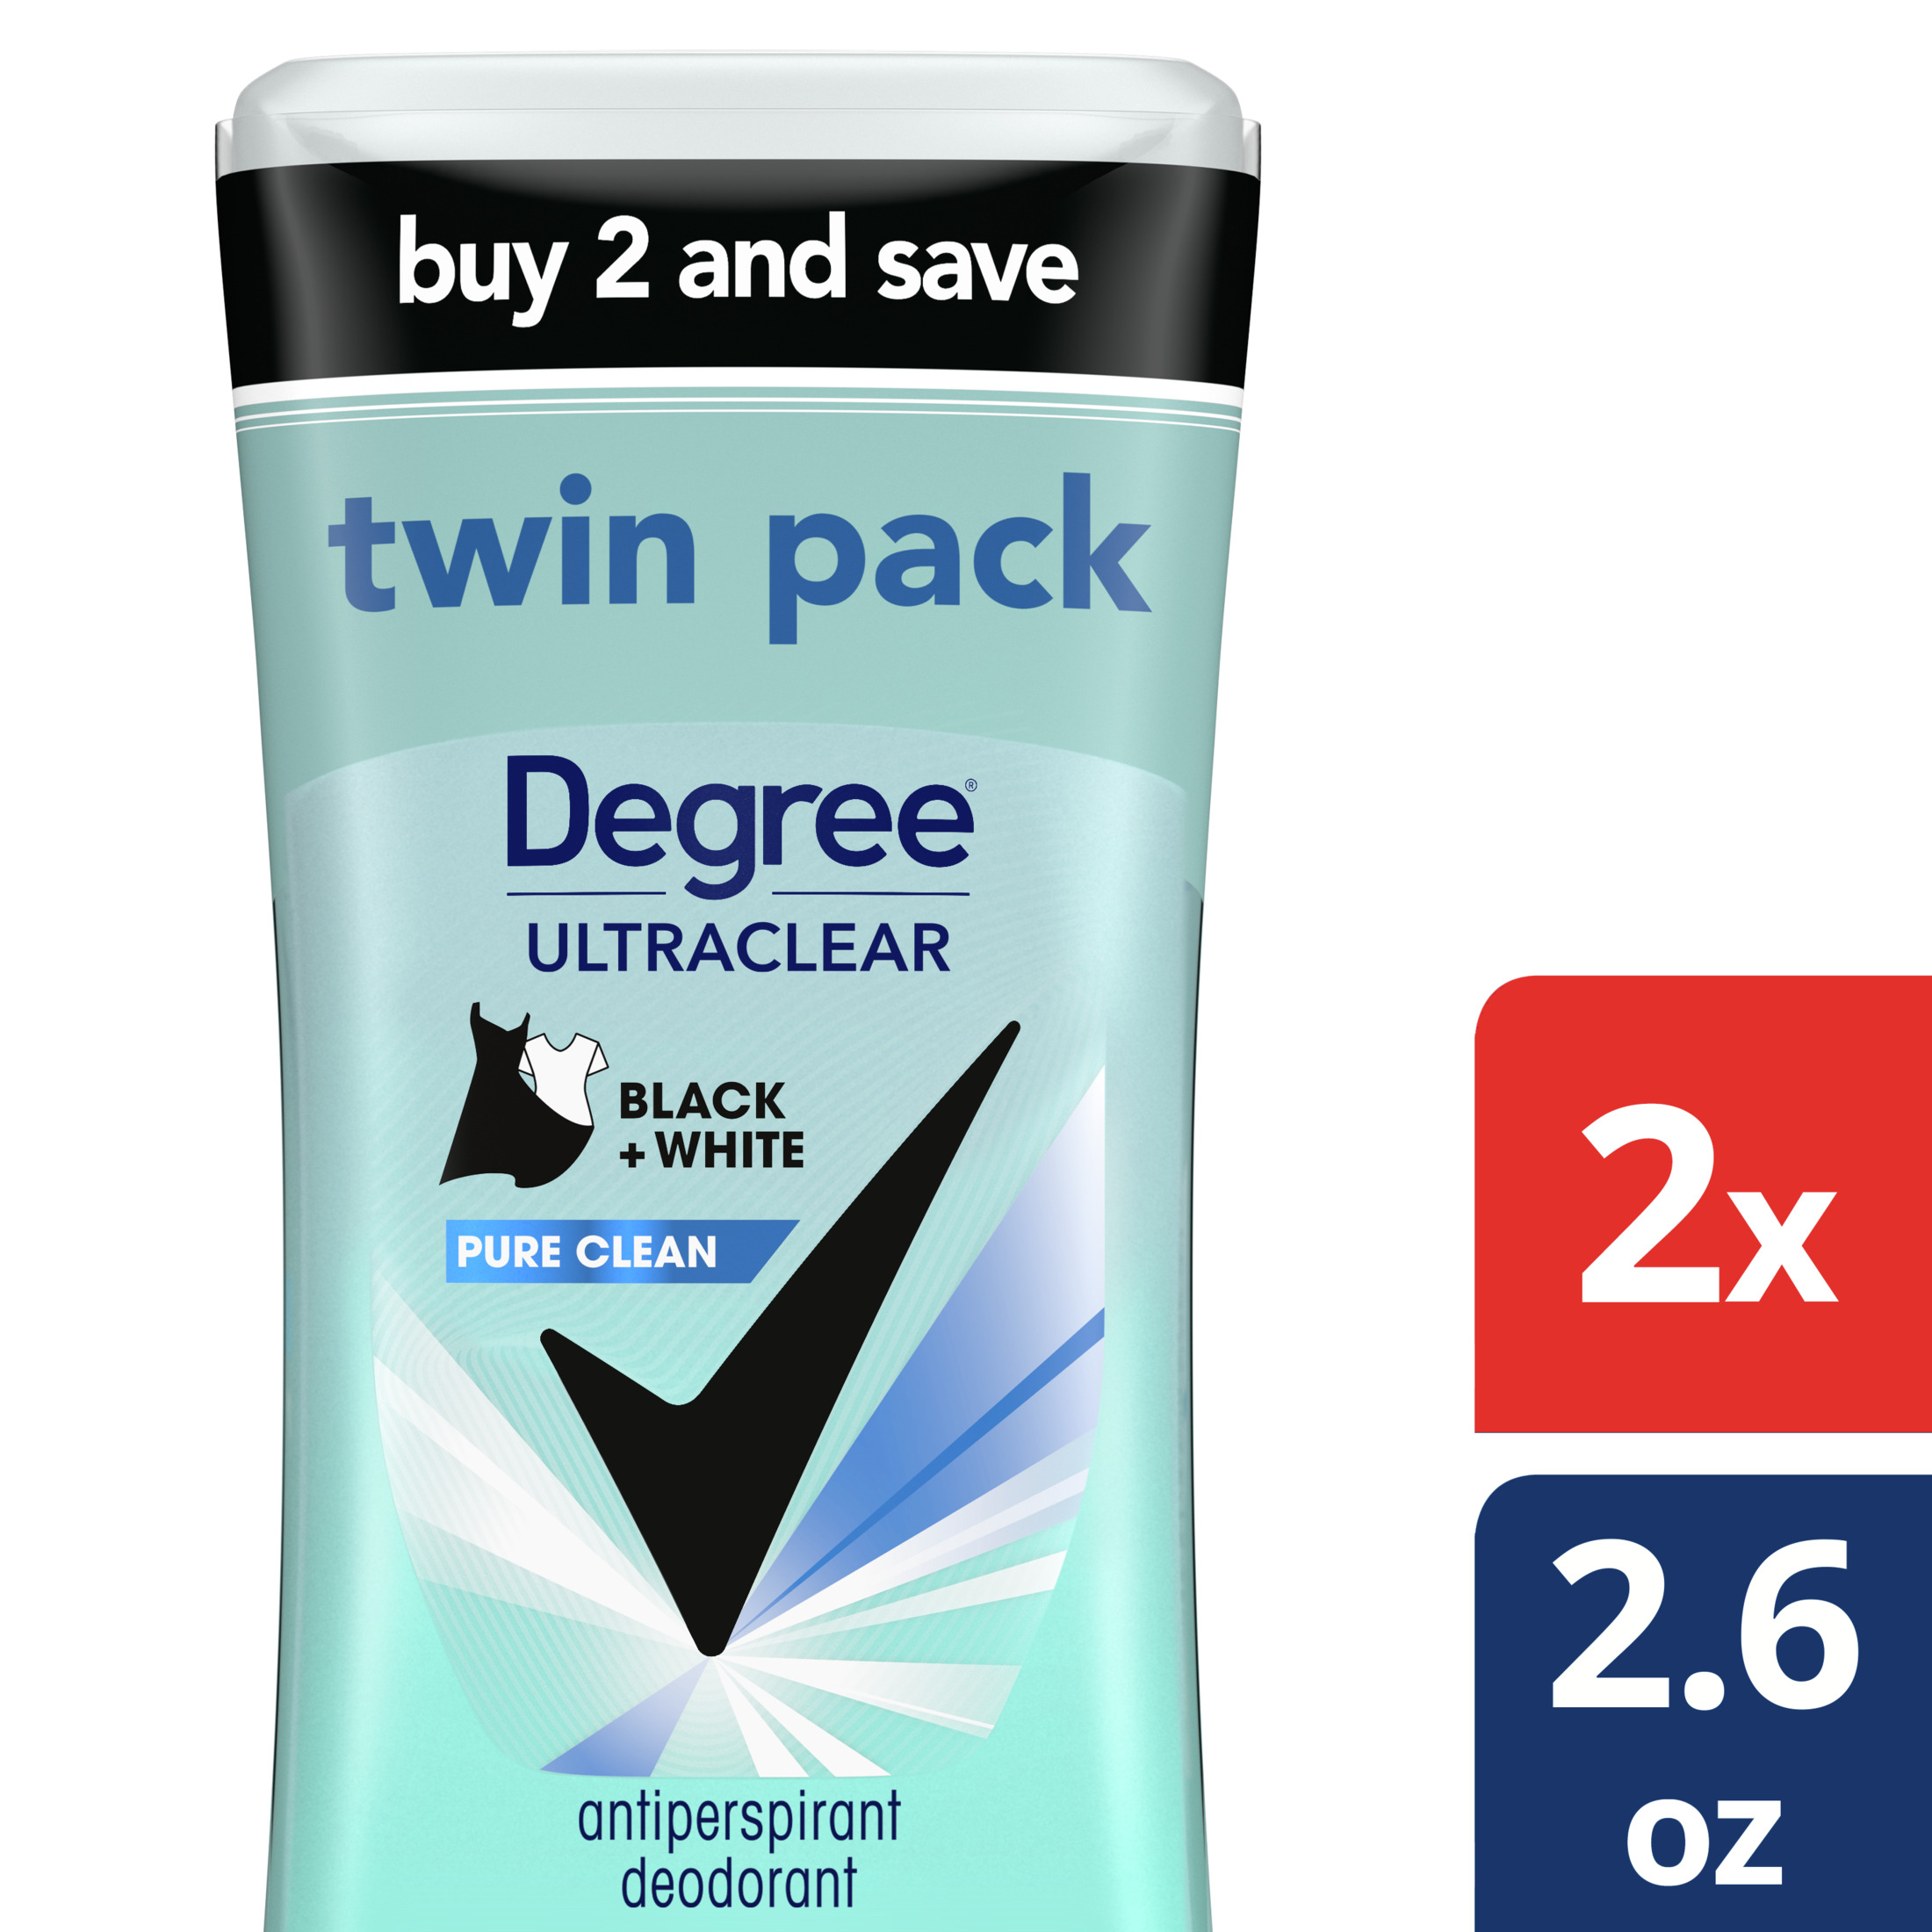 Degree Ultra Clear Long Lasting Women's Antiperspirant Deodorant Stick Twin Pack, Pure Clean, 2.6 oz - image 3 of 11